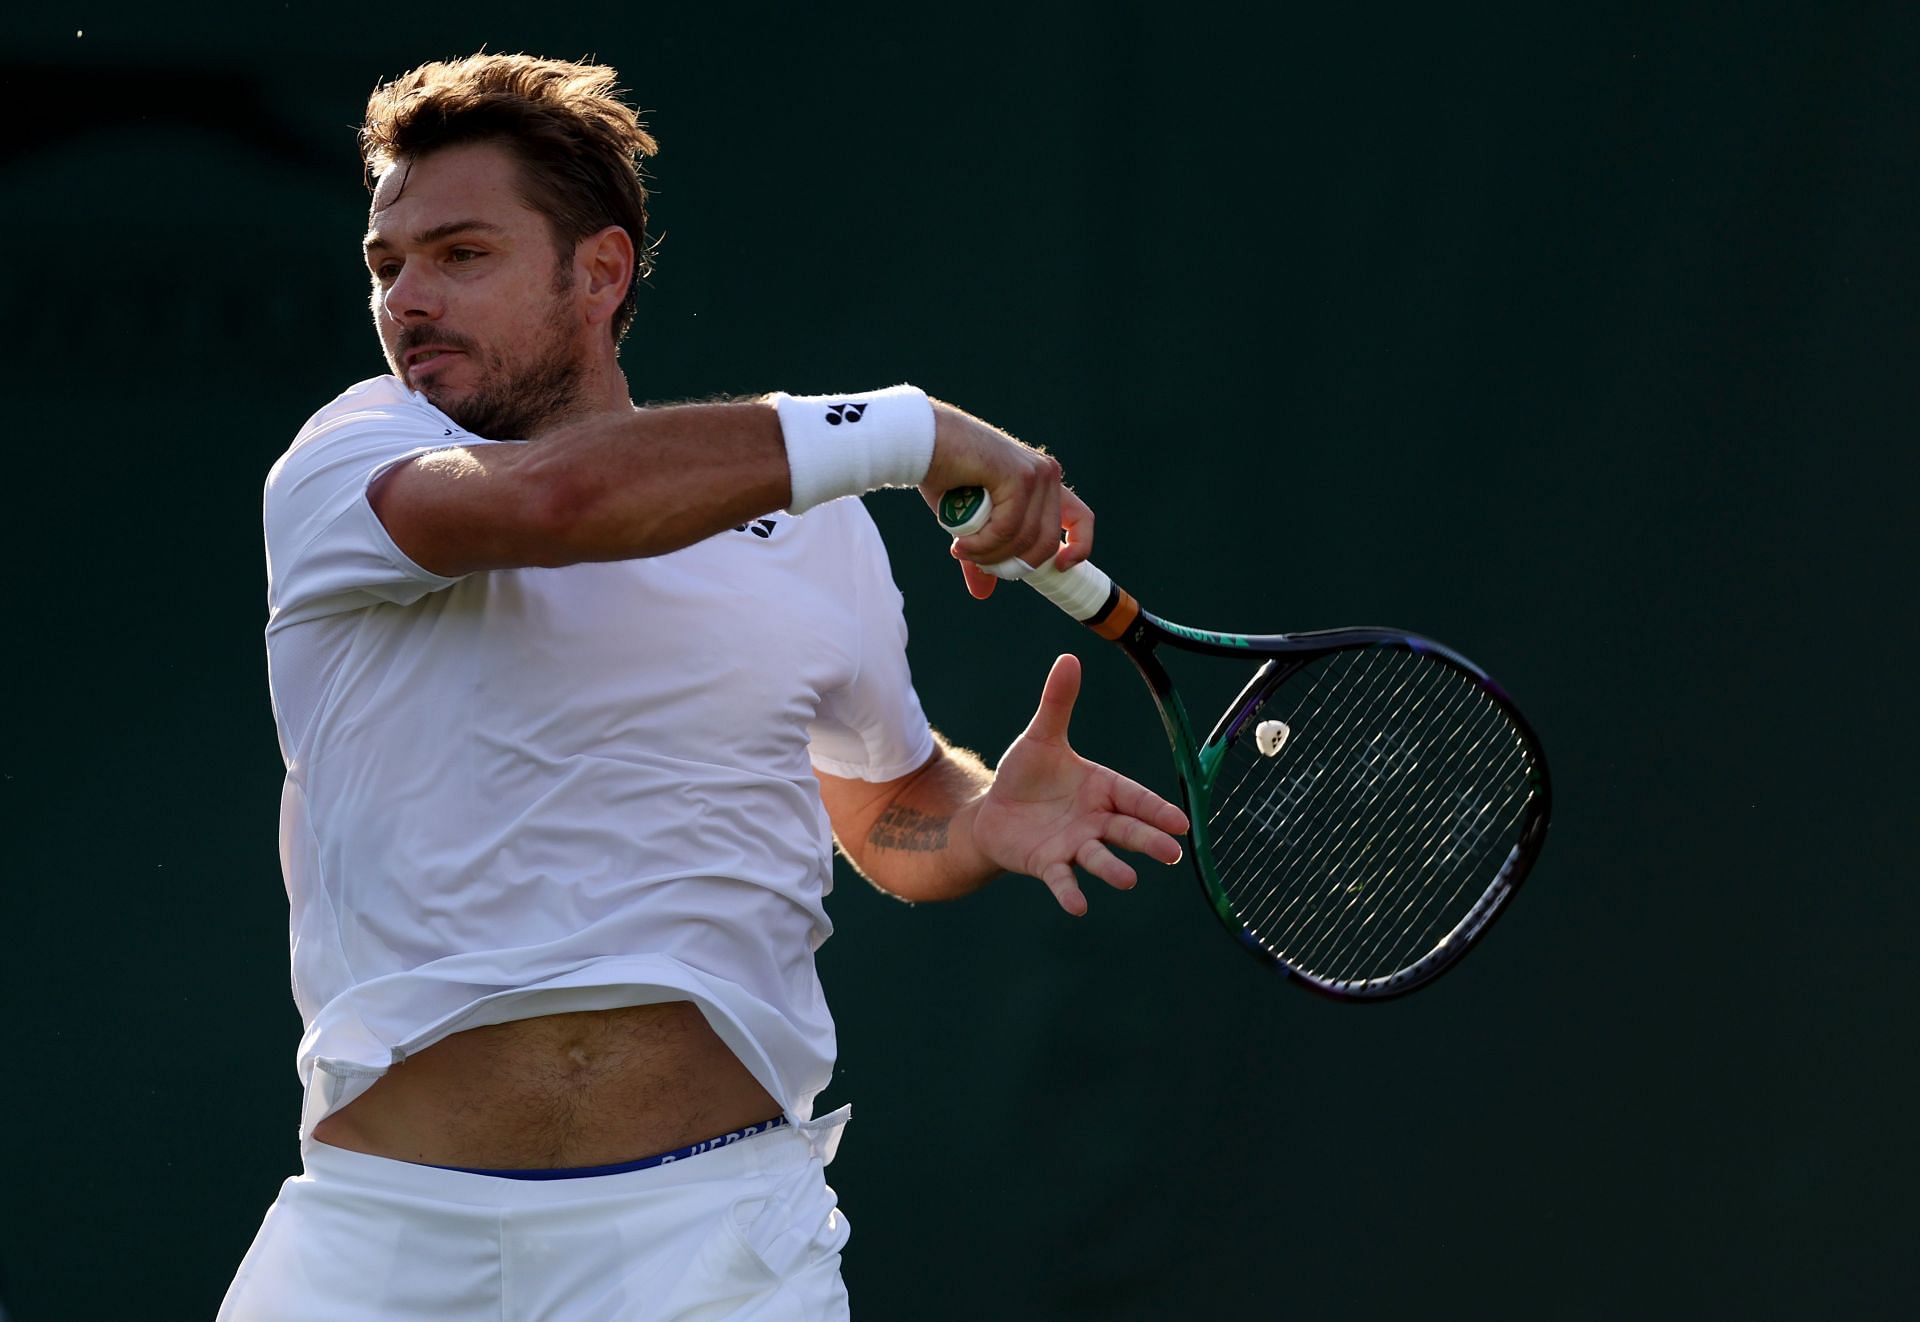 Wawrinka has maintained formidable form in France